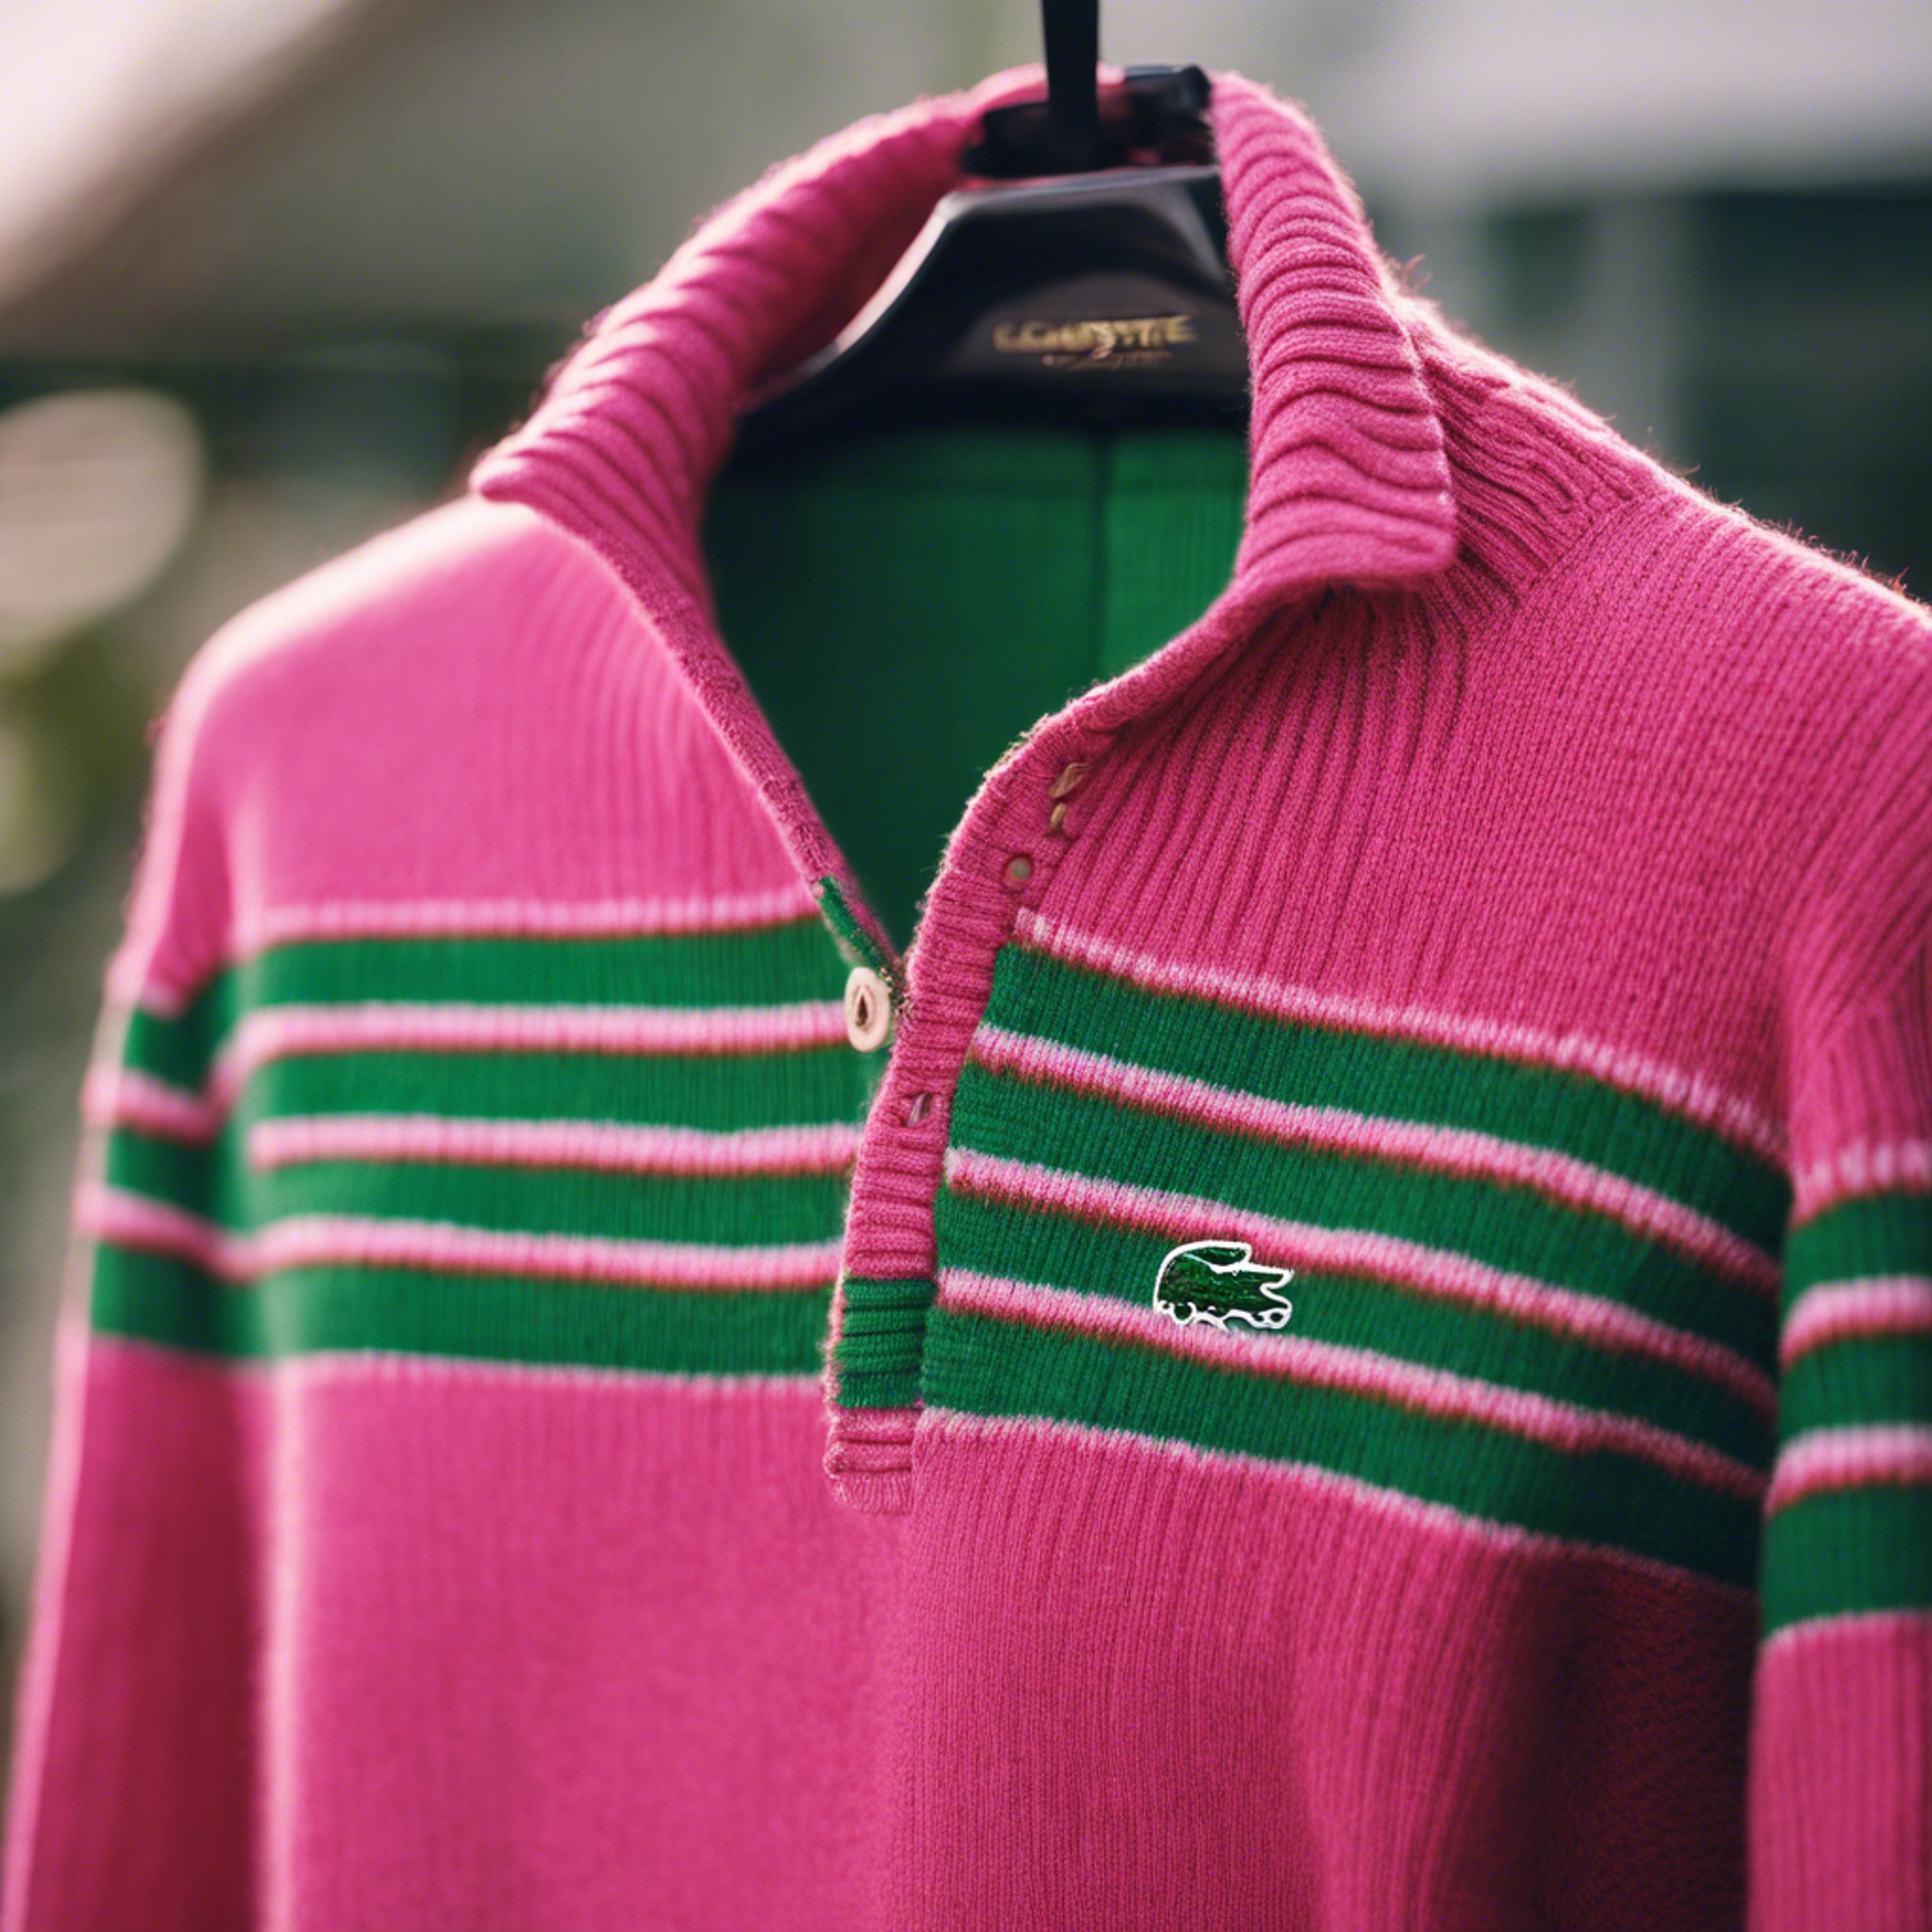 A preppy Lacoste sweater in bright pink and green stripes. Tapeet[46dc671cf42d4e658ddb]